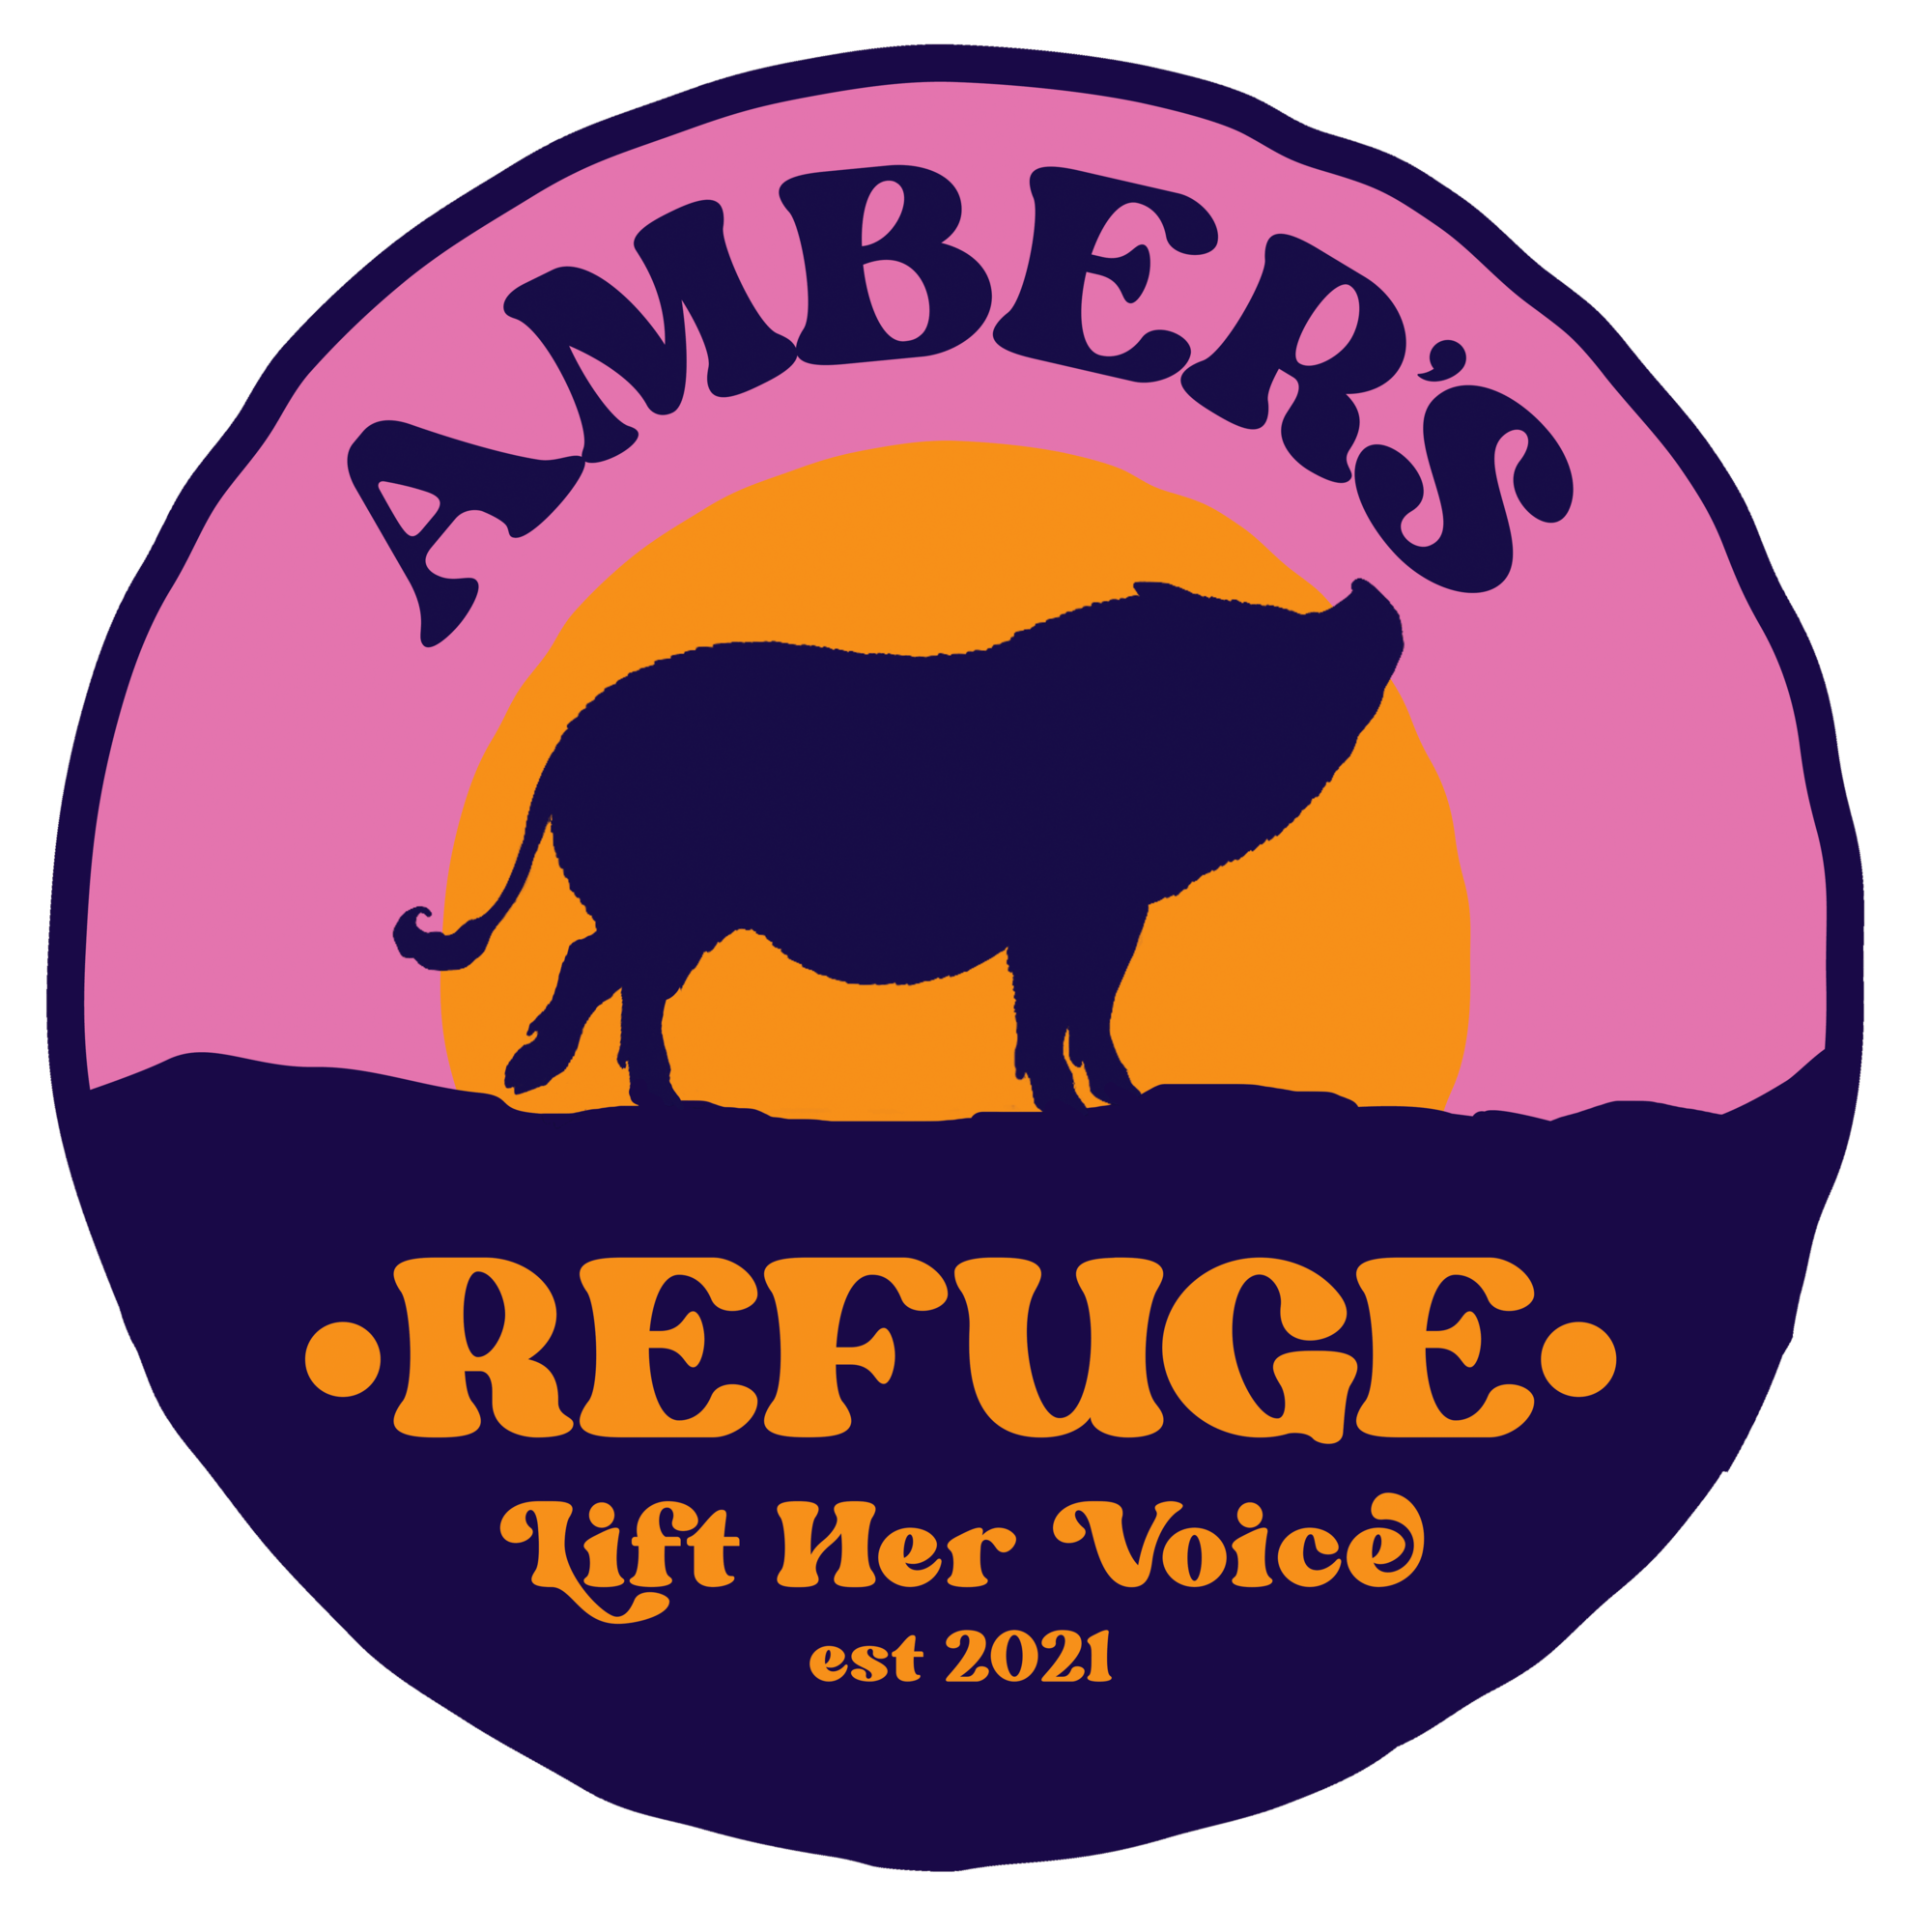 Logo for Amber's Refuge featuring a purple pig silhouette against an orange and pink background with text that reads: Lift her voice - established 2021"